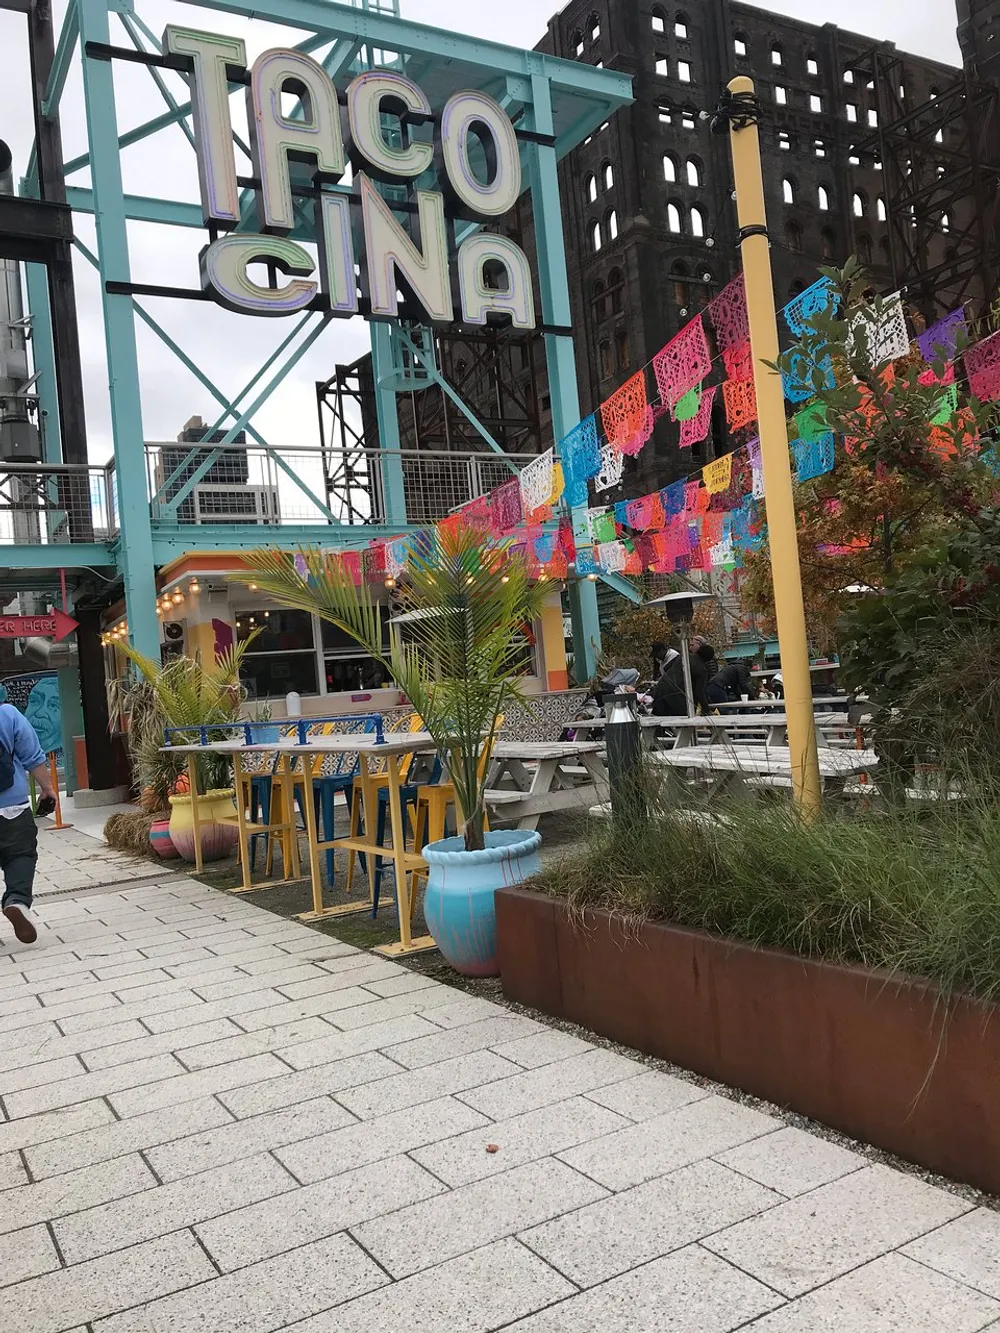 The image shows an outdoor seating area of a colorful Mexican restaurant named Tacocina decorated with bright papel picado banners against the backdrop of an industrial structure